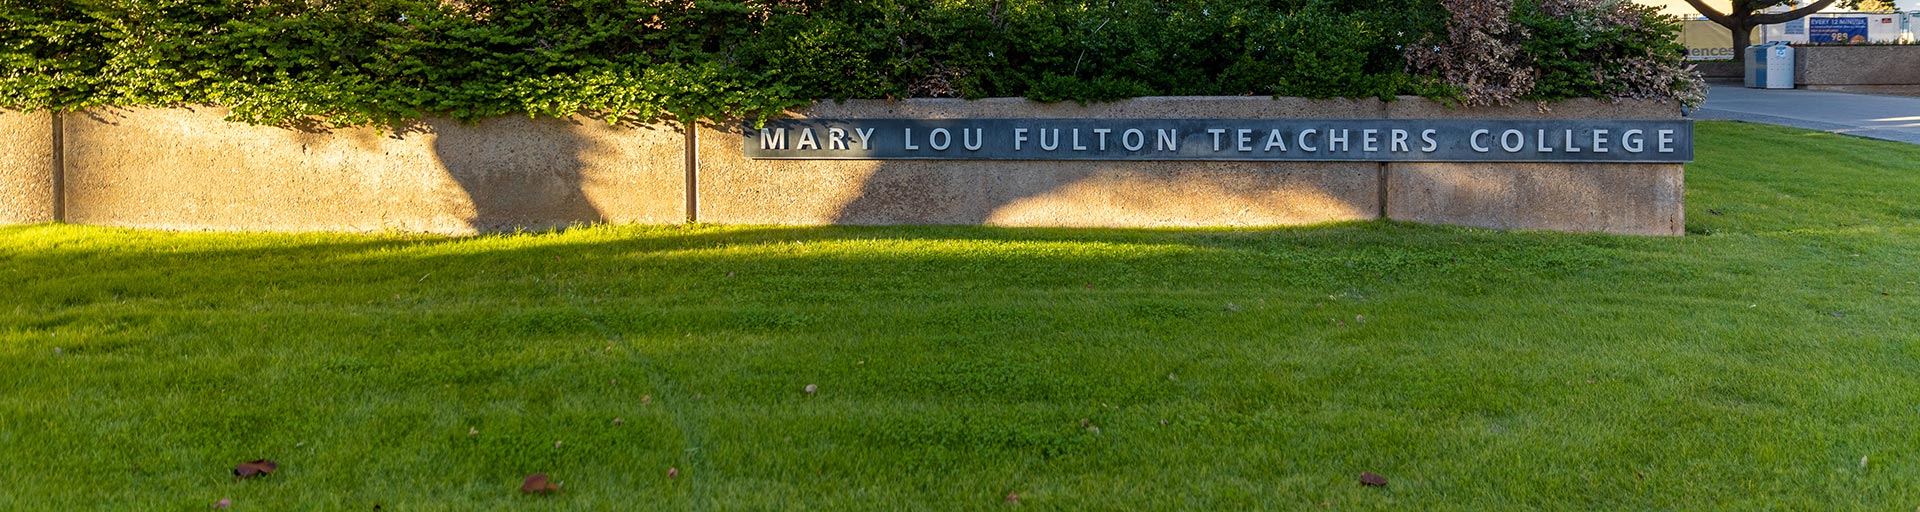 Building sign for Mary Lou Fulton teachers college